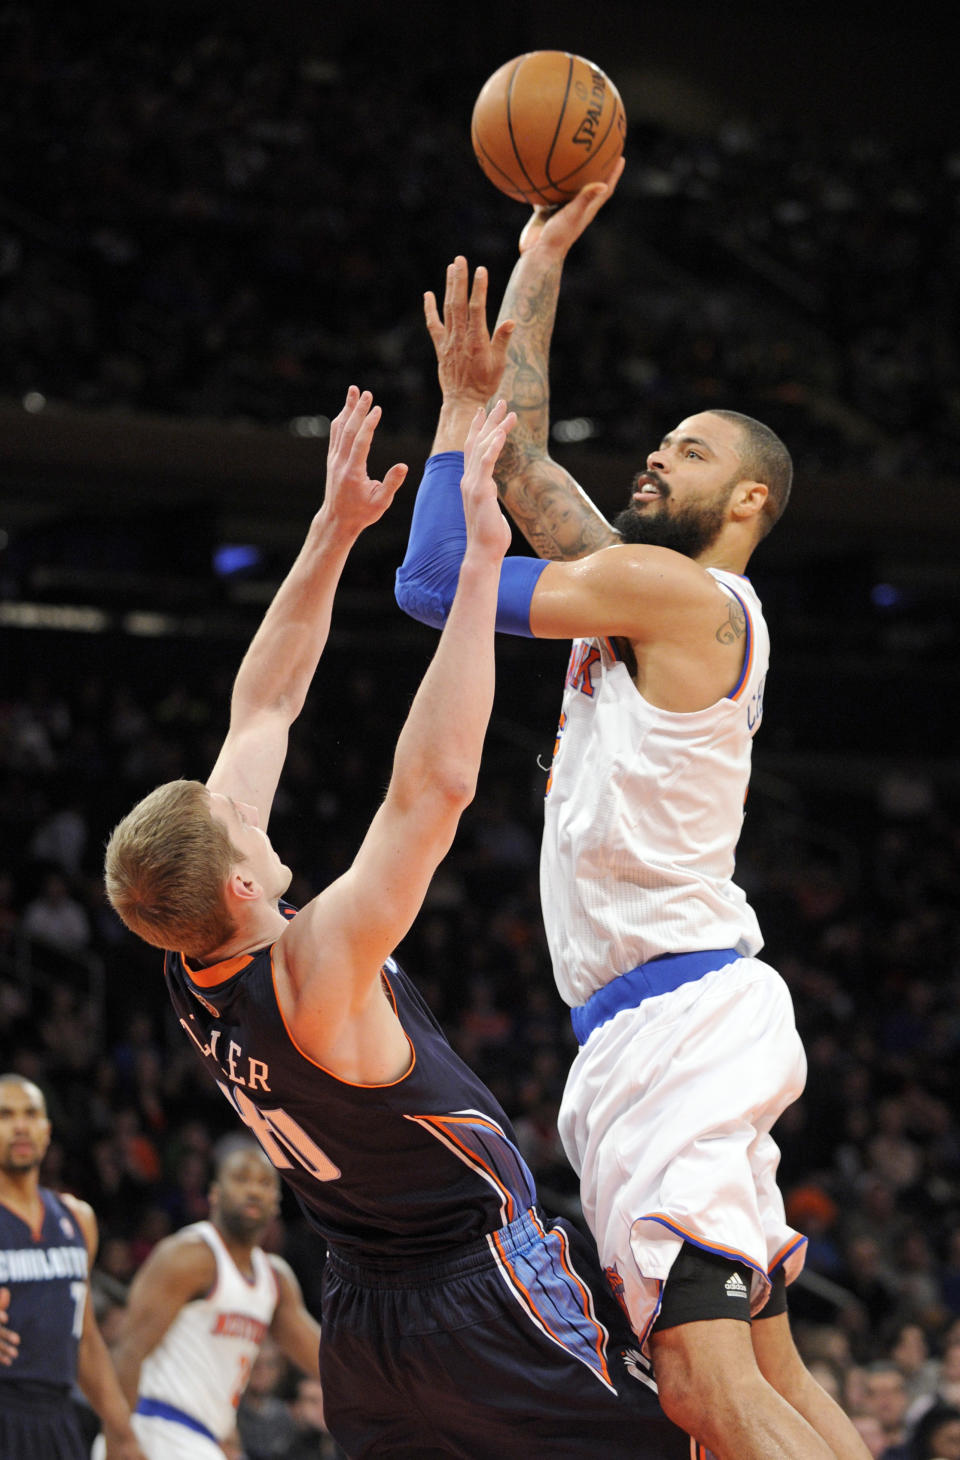 New York Knicks' Tyson Chandler, right, pits up a shot over Charlotte Bobcats' Cody Zeller during the first quarter of an NBA basketball game, Friday, Jan. 24, 2014, at Madison Square Garden in New York. The Knicks won 125-96. (AP Photo/Bill Kostroun)